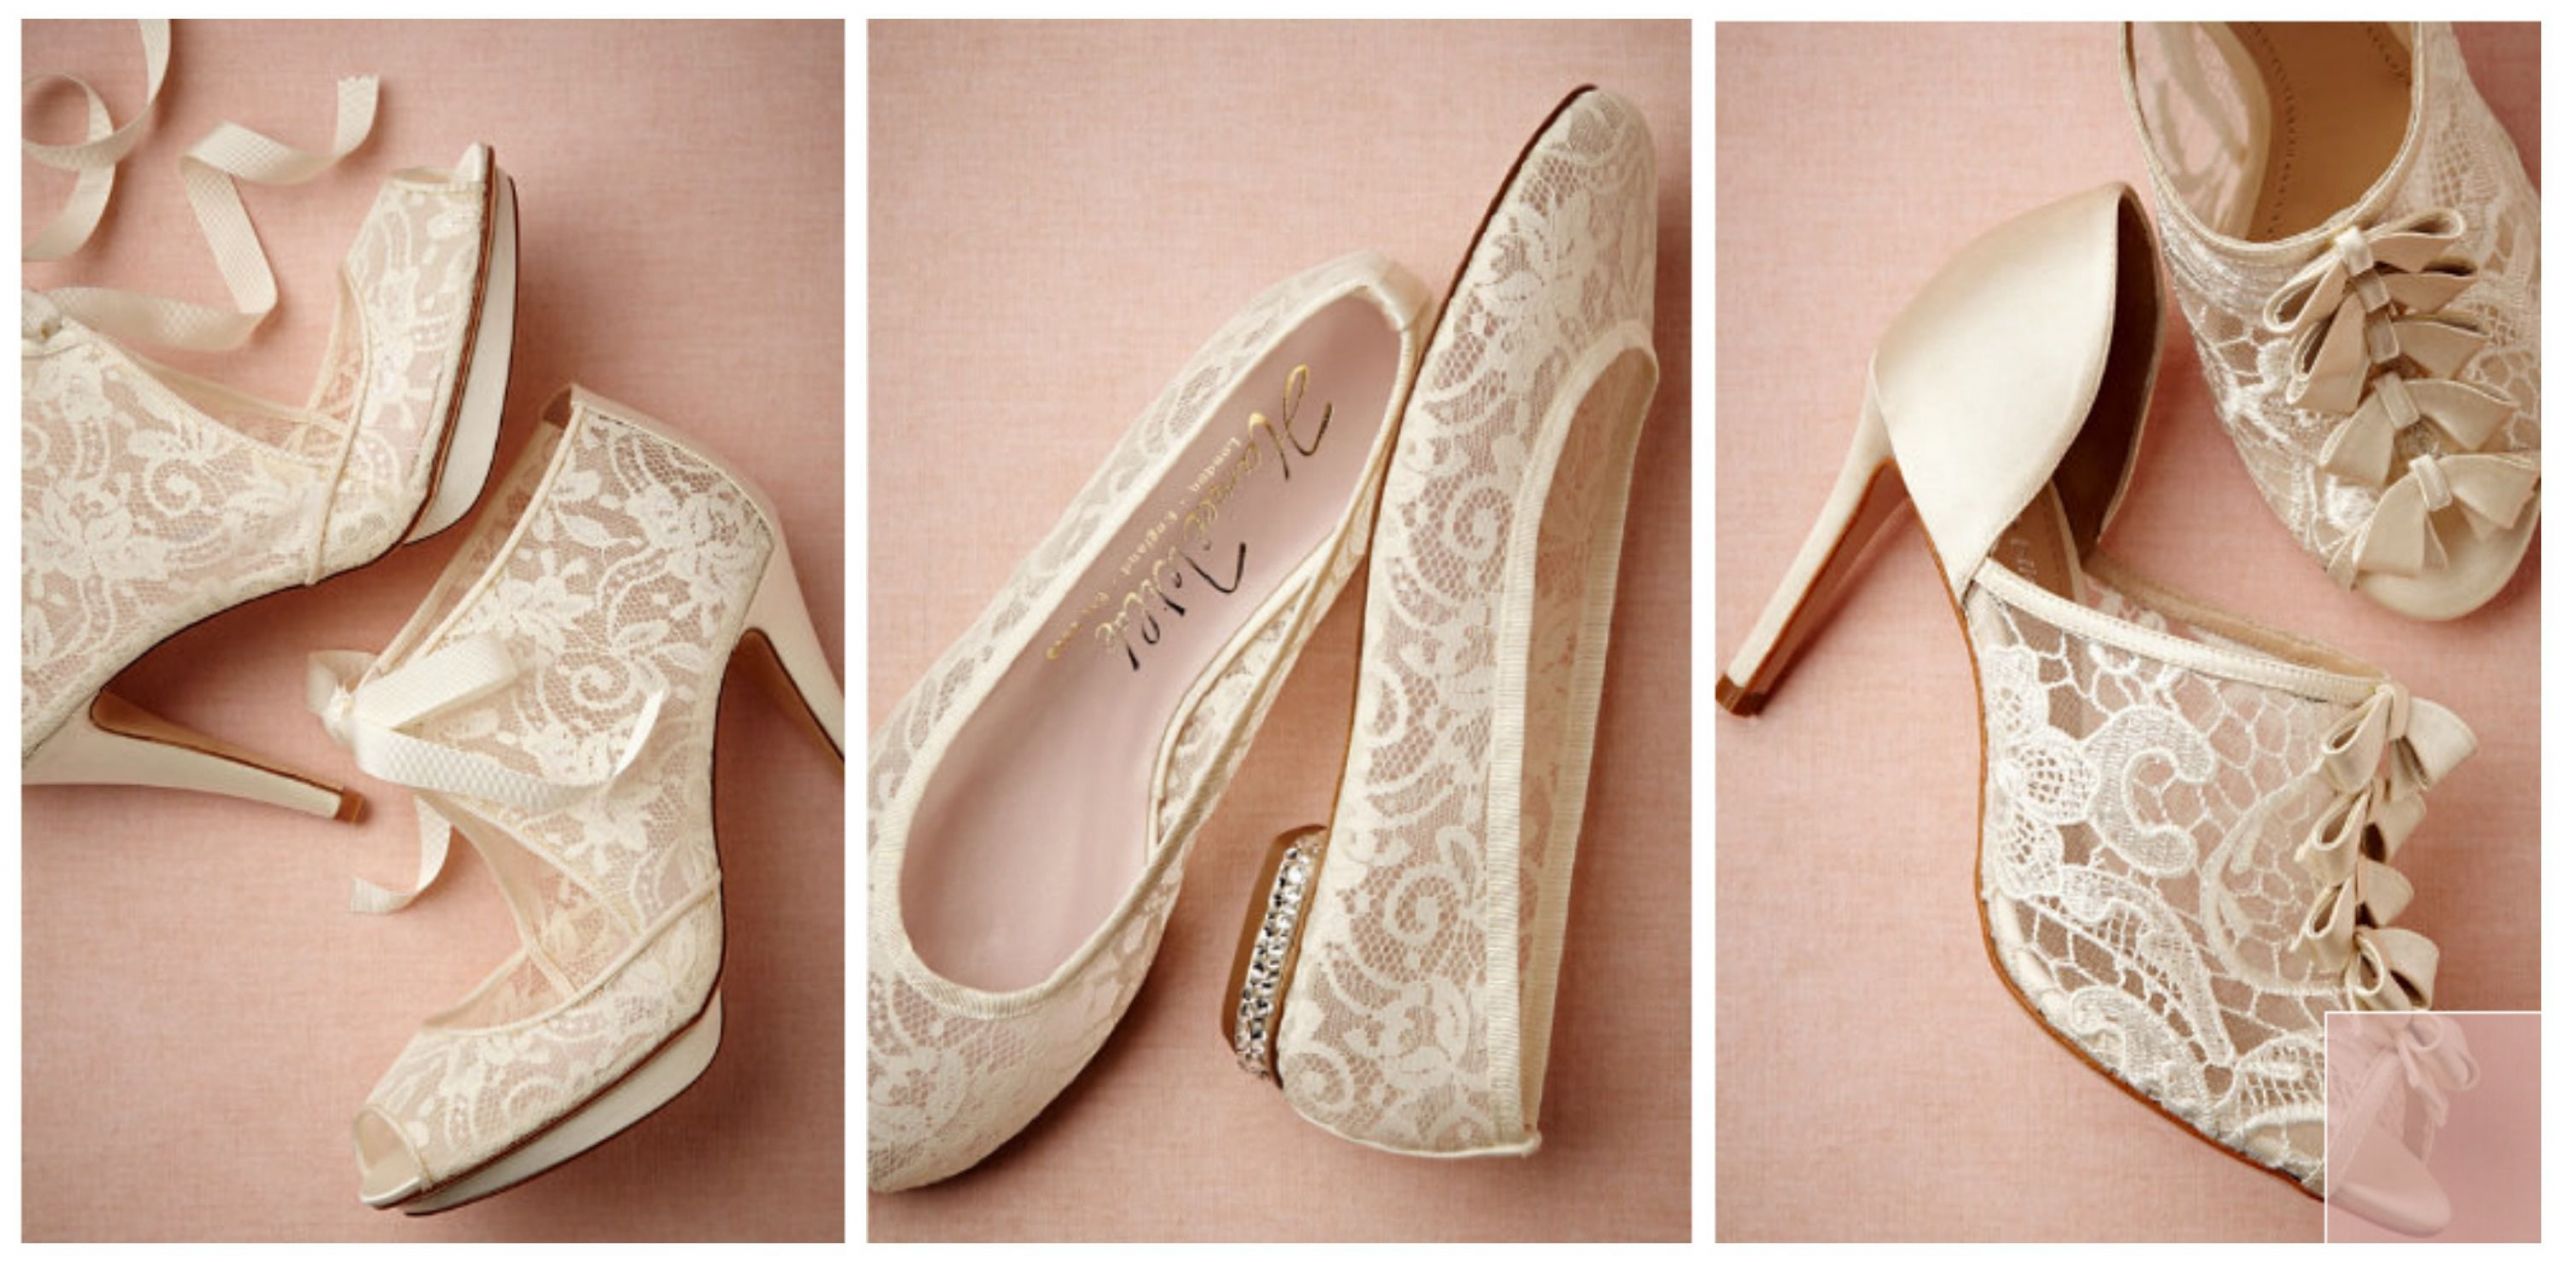 Rustic Wedding Shoes
 Statement Wedding Shoes for the Bride Rustic Wedding Chic